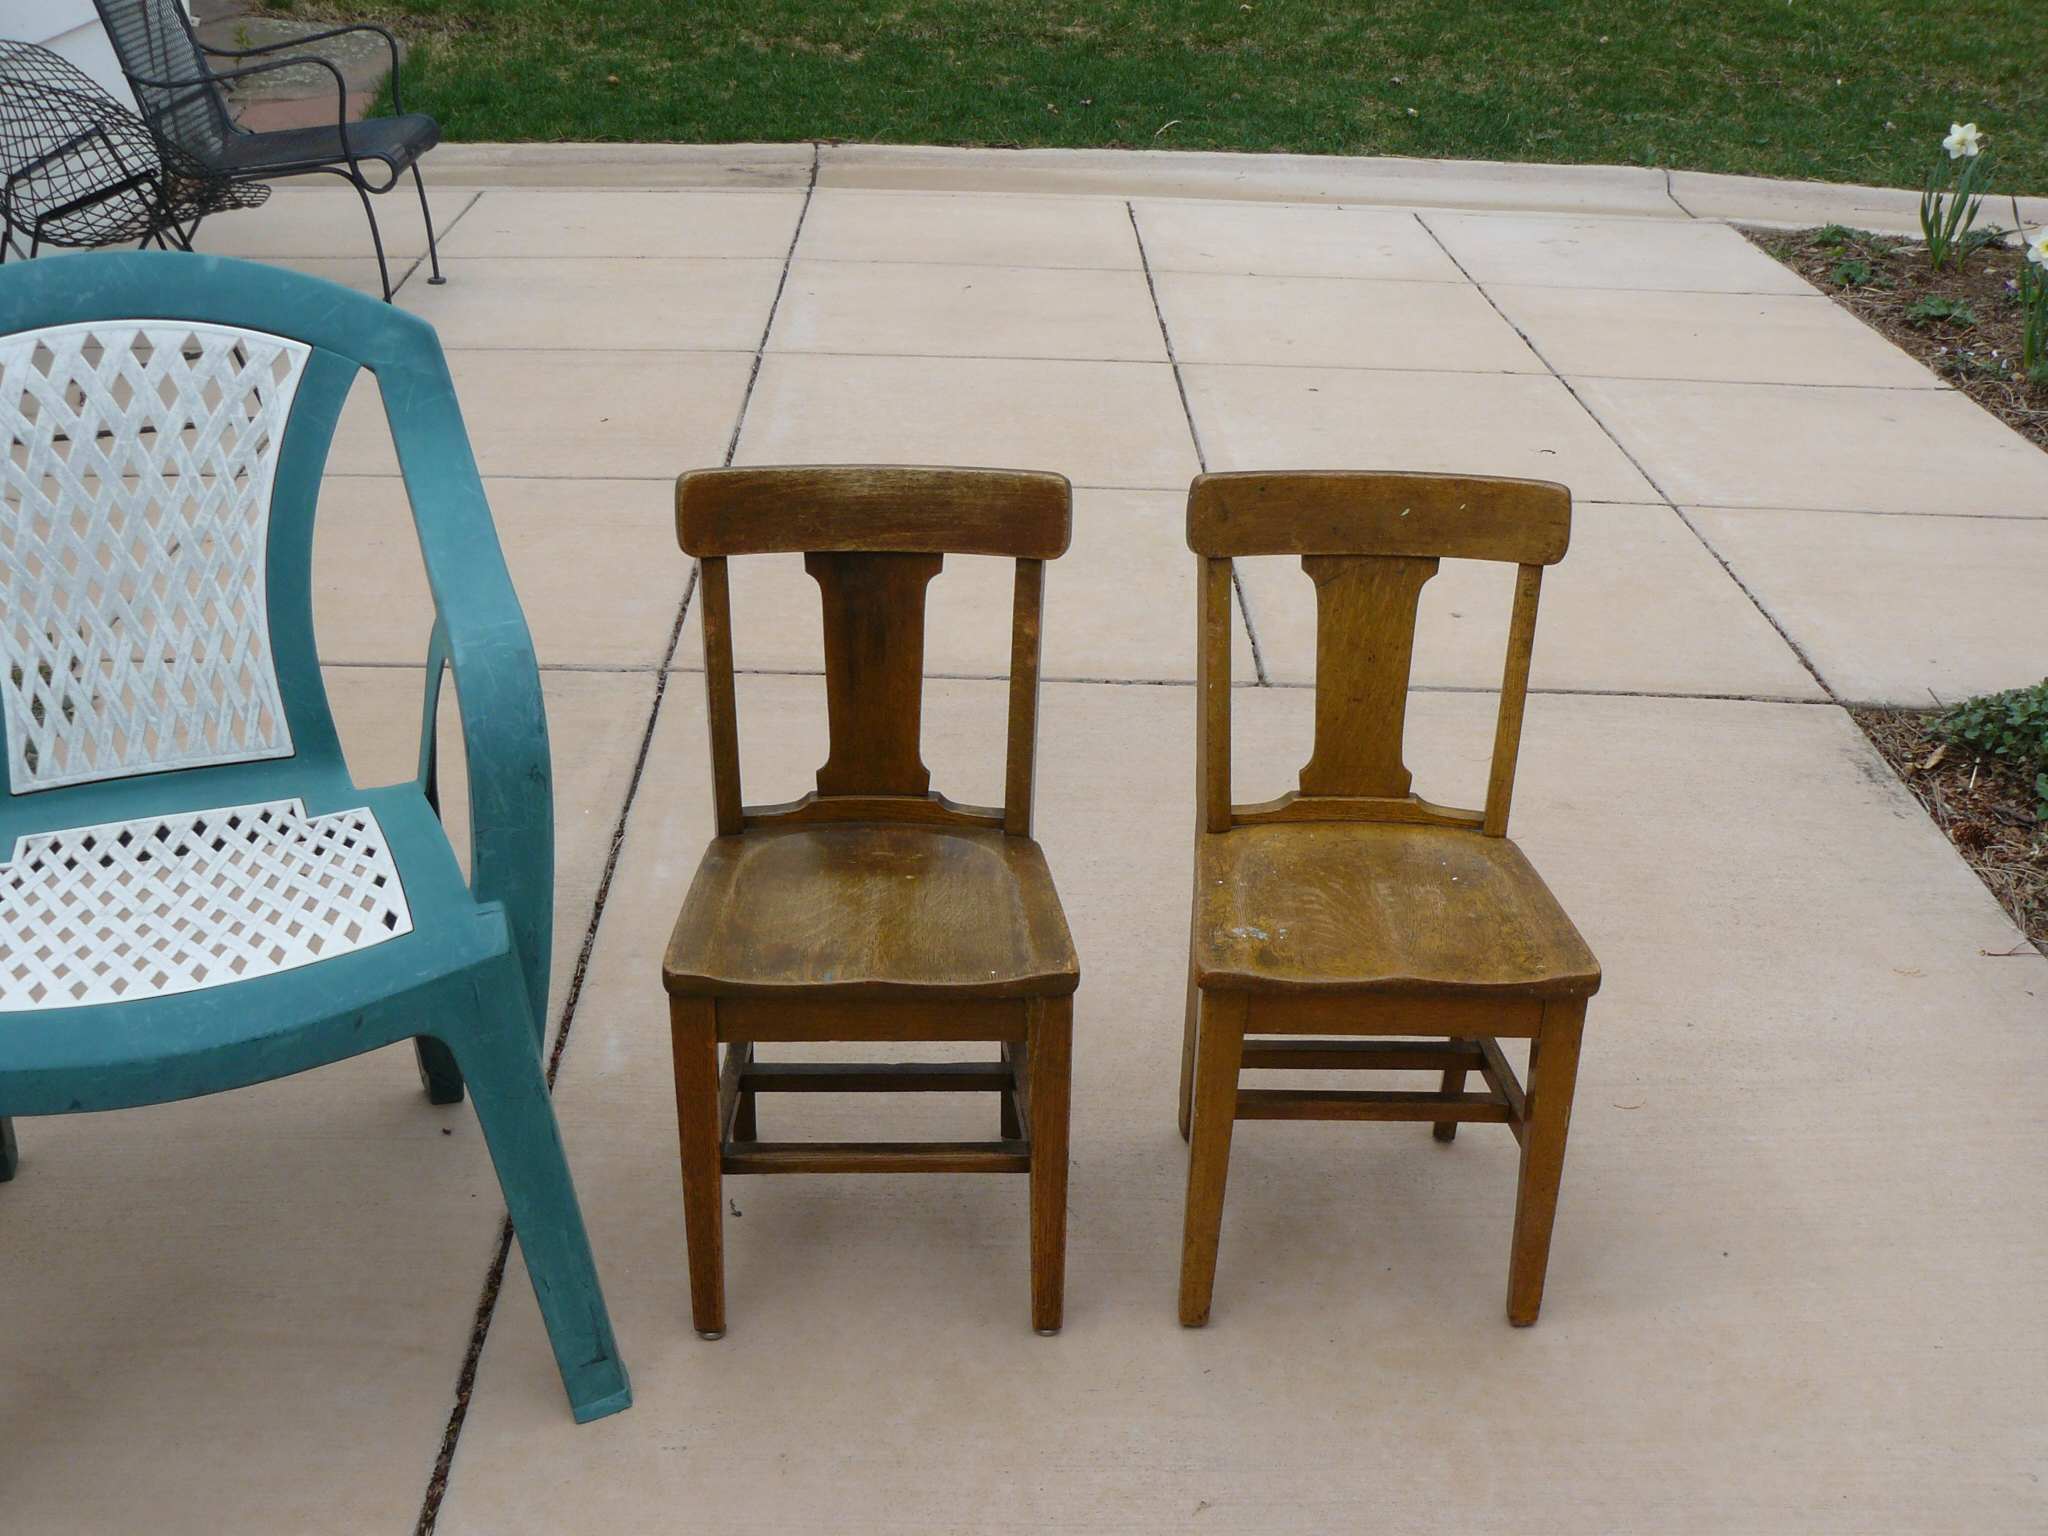 2 small solid wood school chairs 1940's(? )"Property City